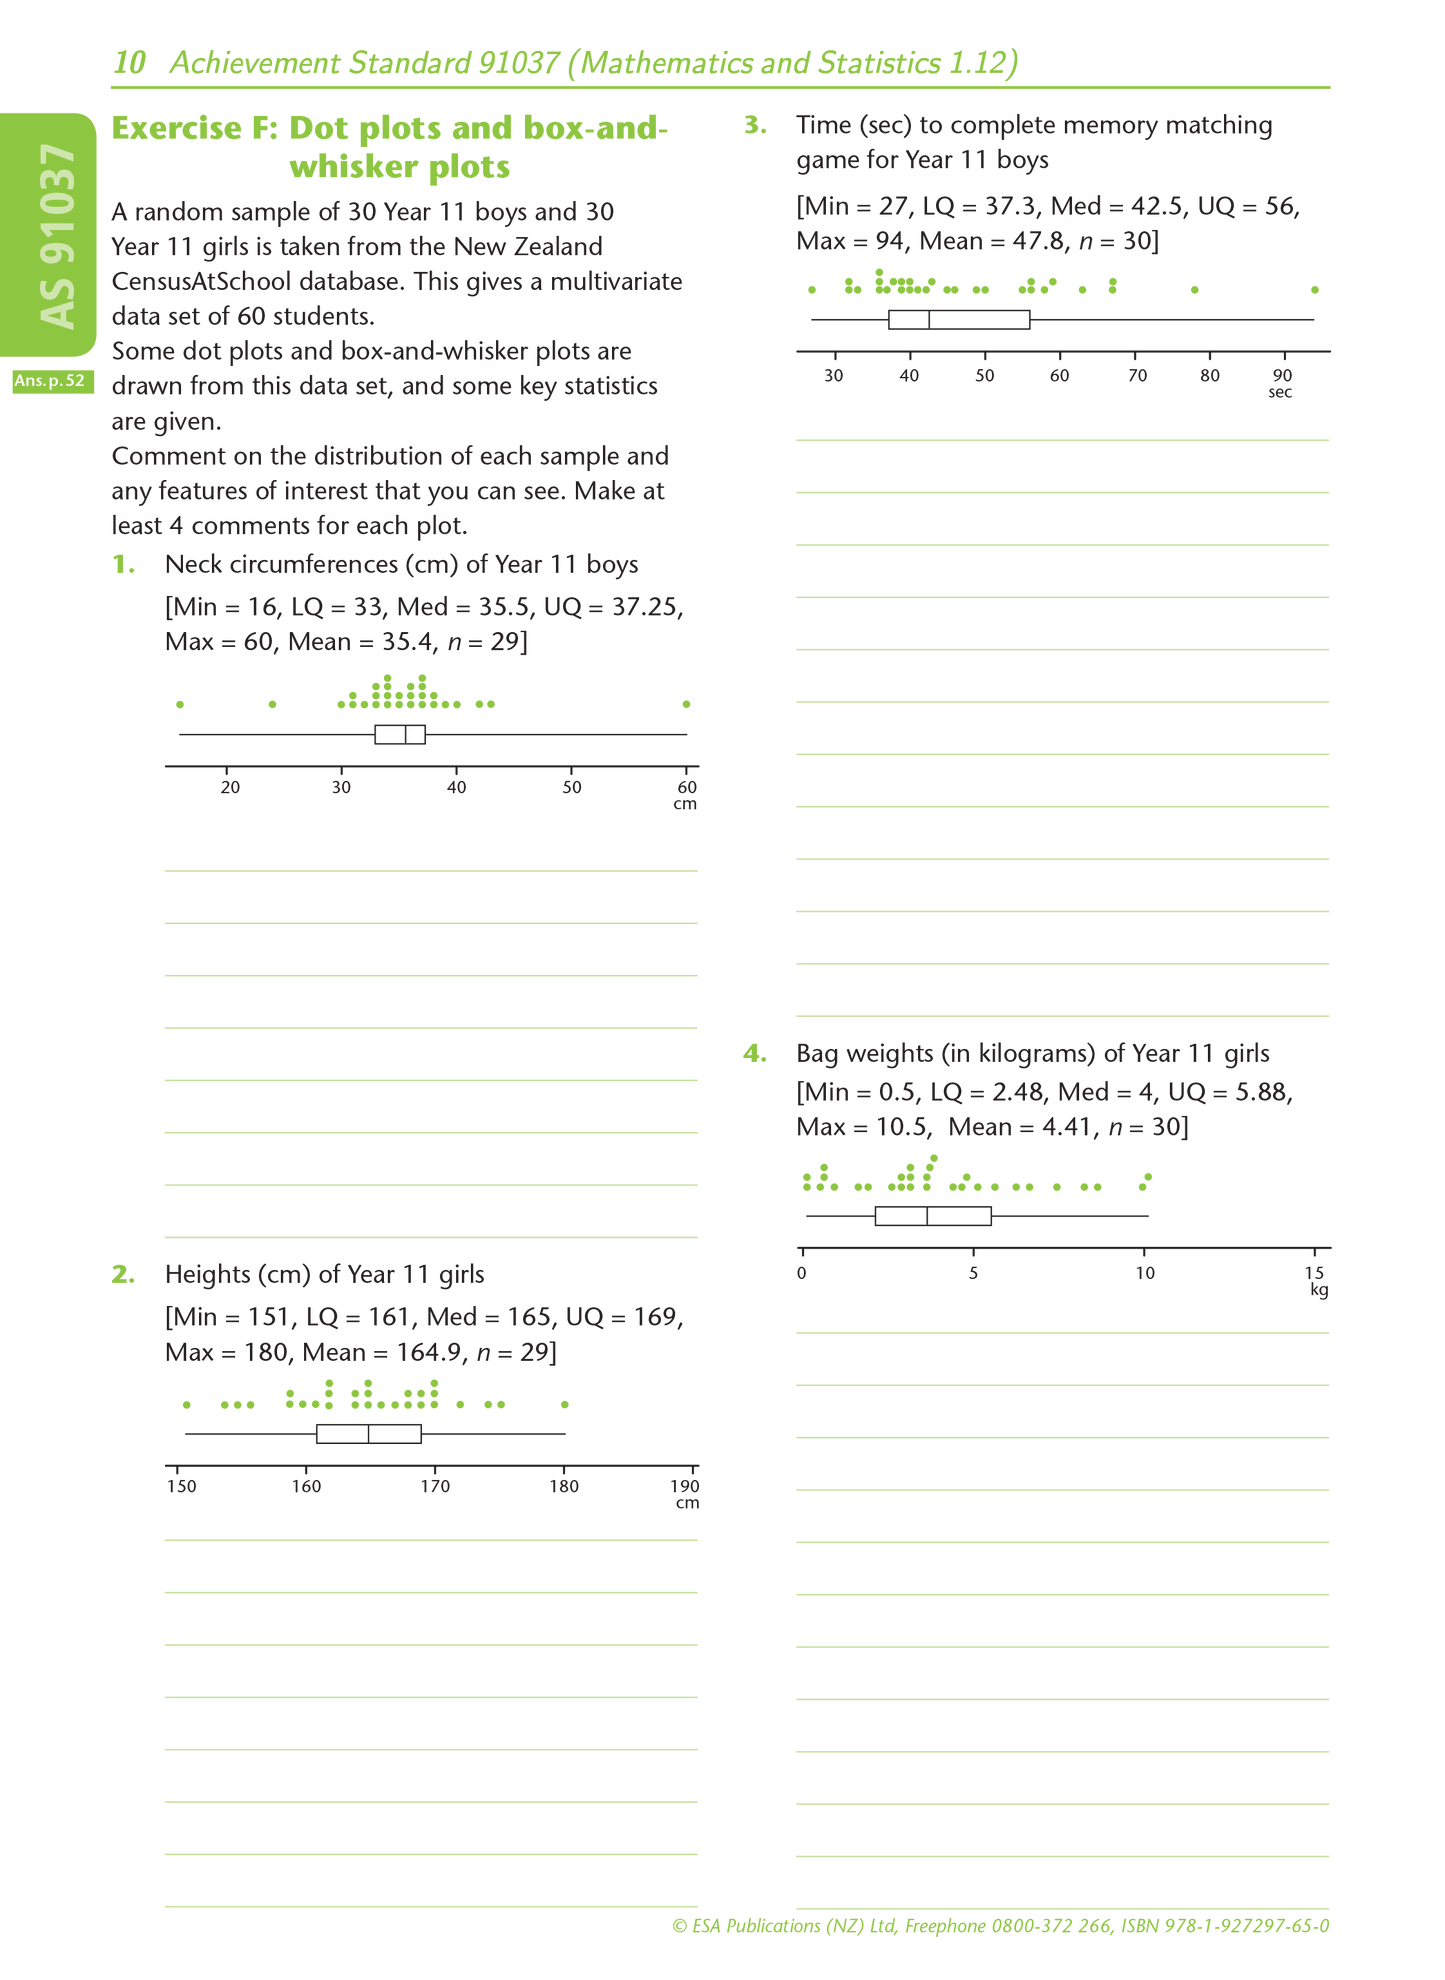 Level 1 Chance and Data 1.12 Learning Workbook